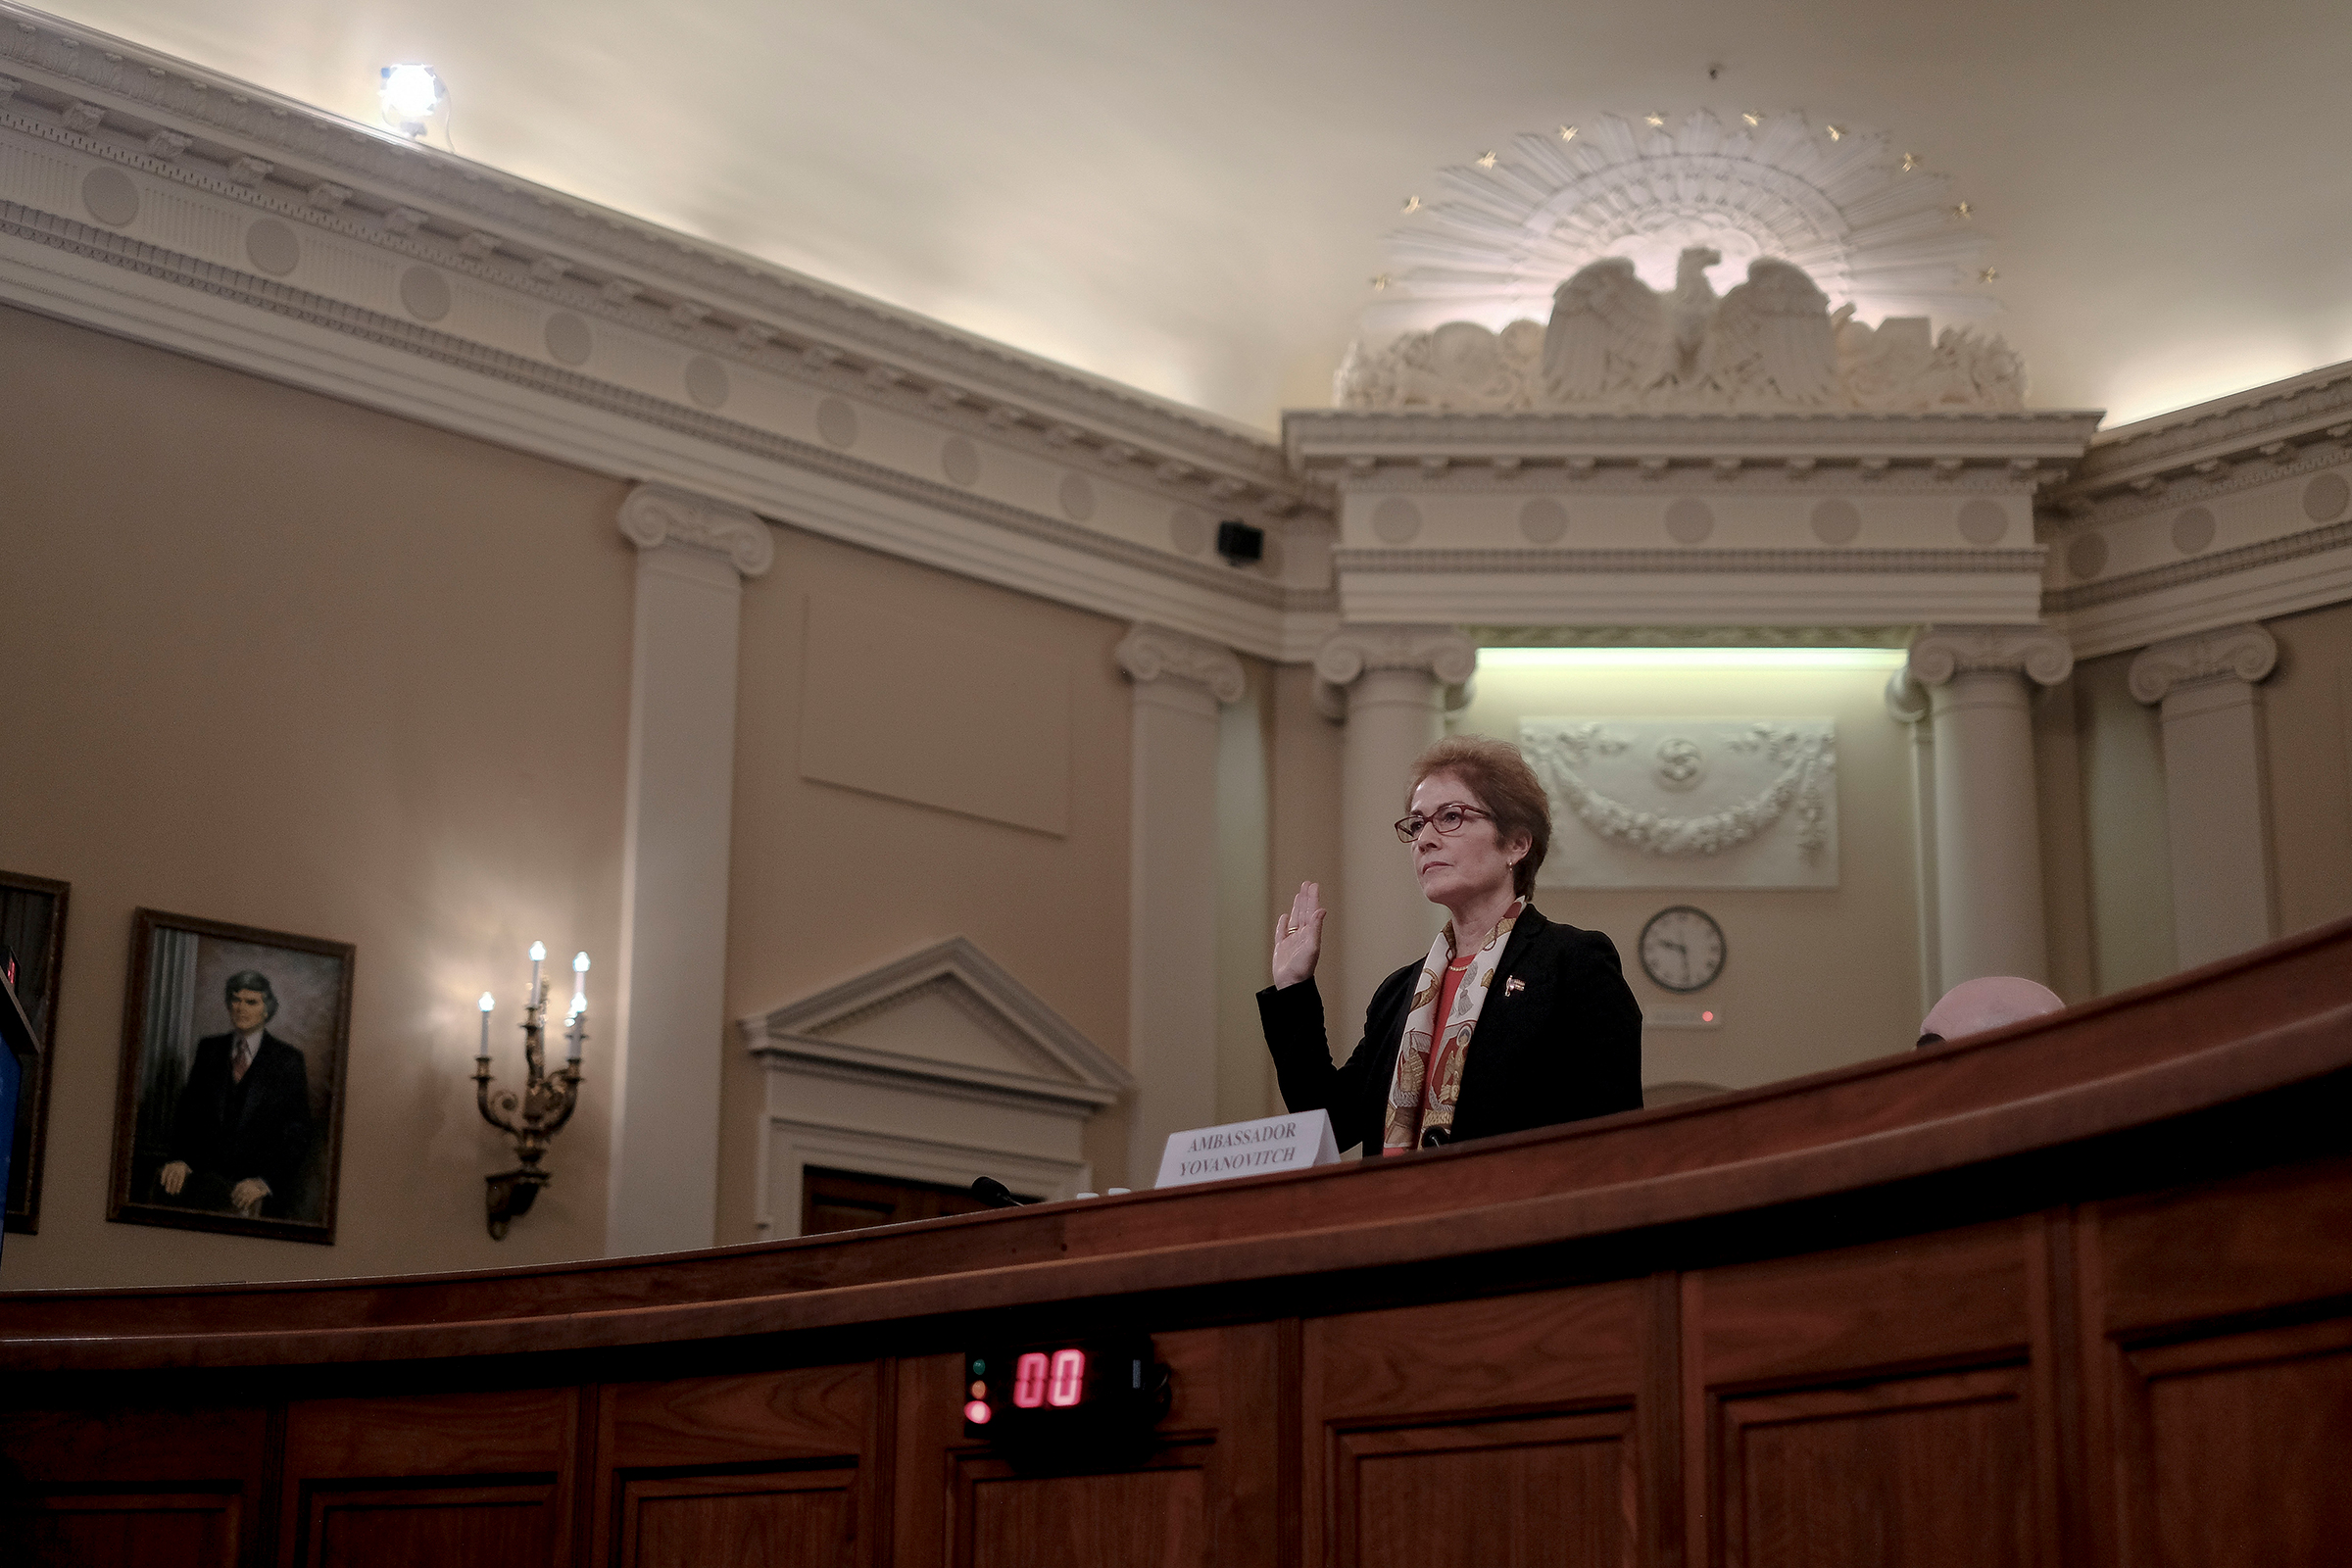 Marie Yovanovitch, the former ambassador to Ukraine, is sworn in during a House Intelligence Committee hearing on the impeachment inquiry in Washington, D.C., on Nov. 15, 2019. (Gabriella Demczuk for TIME)